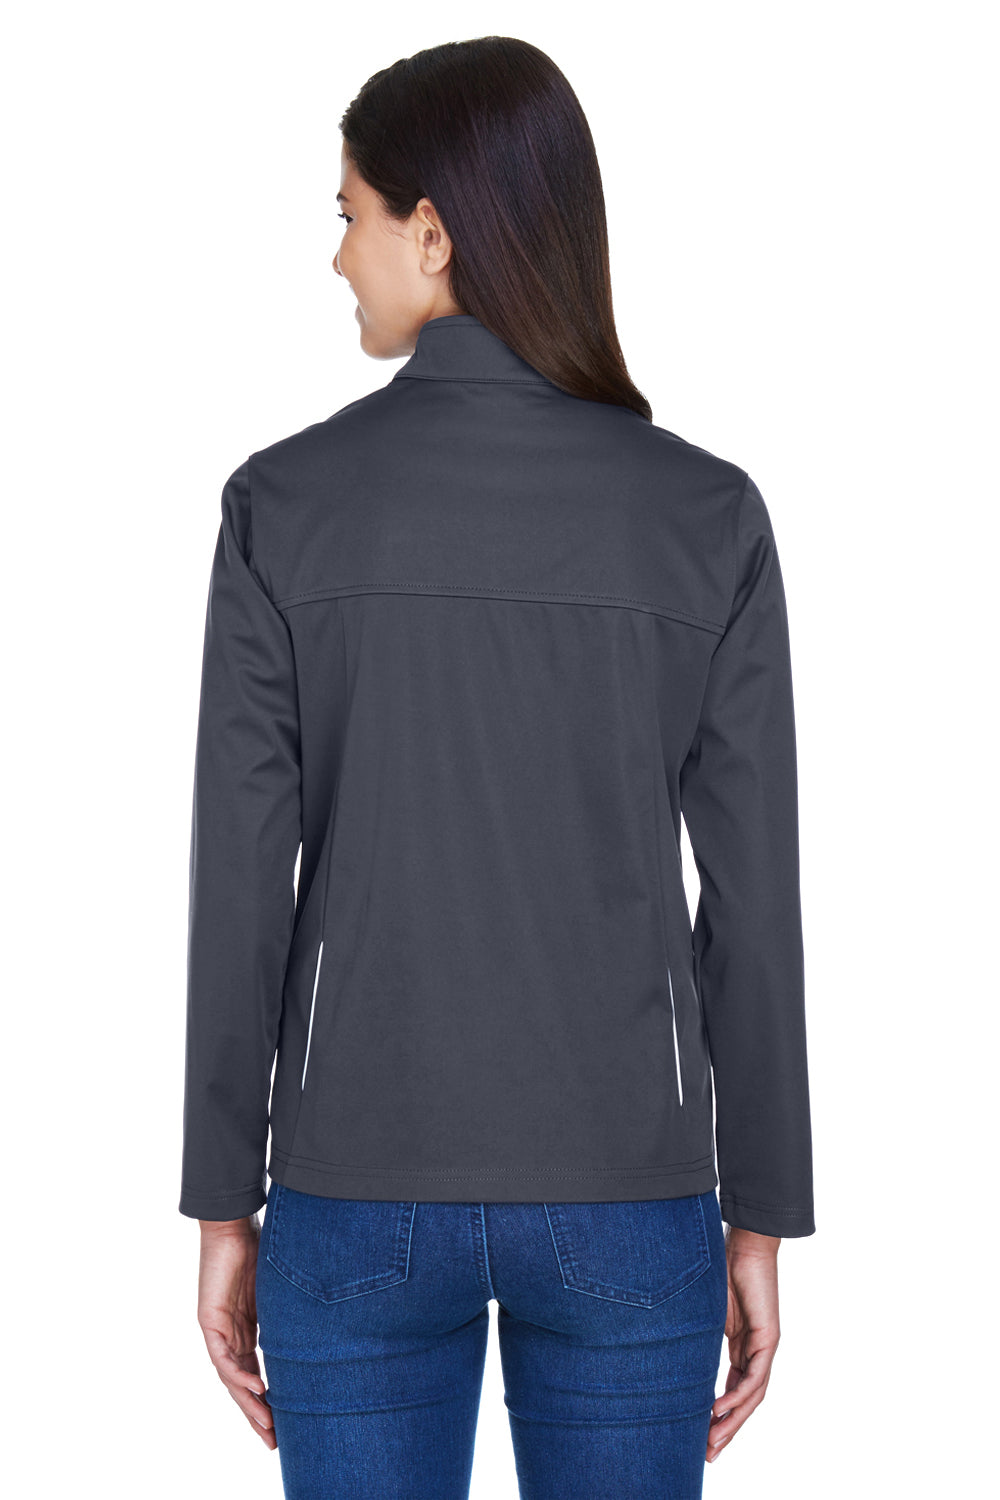 Core 365 CE708W Womens Techno Lite Water Resistant Full Zip Jacket Carbon Grey Back